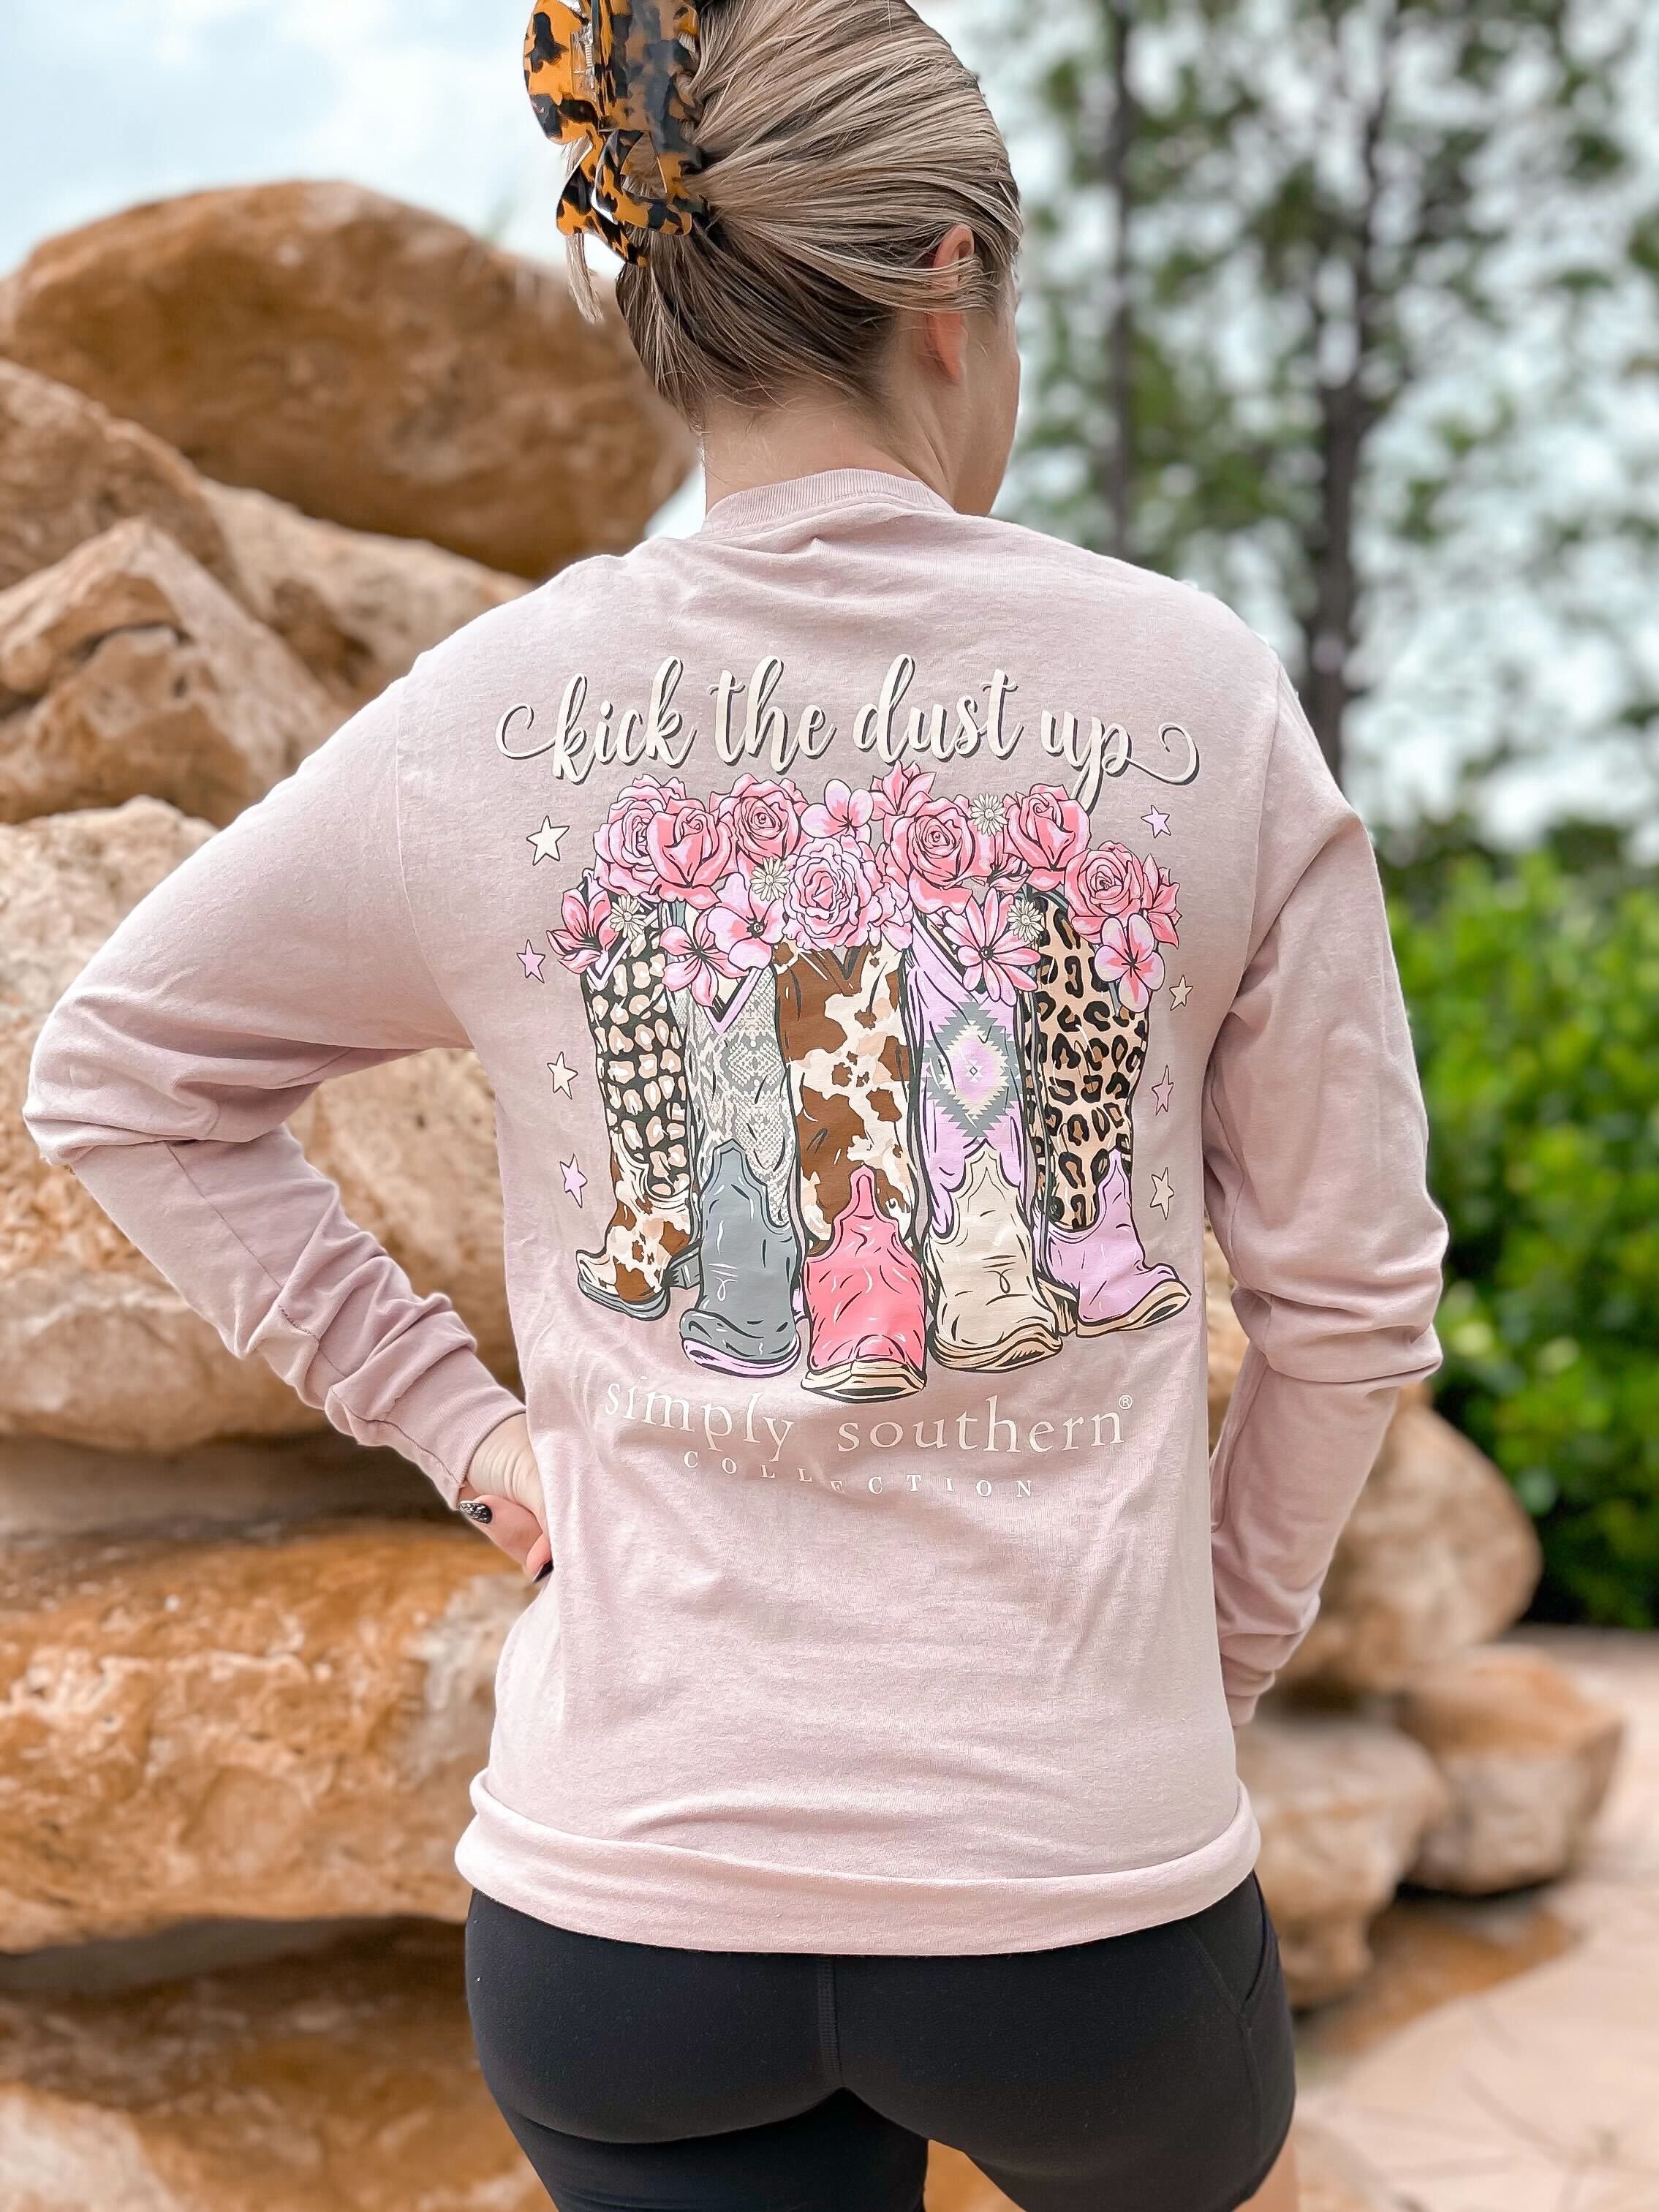 'Kick The Dust Up' Cowboy Boots Long Sleeve Tee by Simply Southern